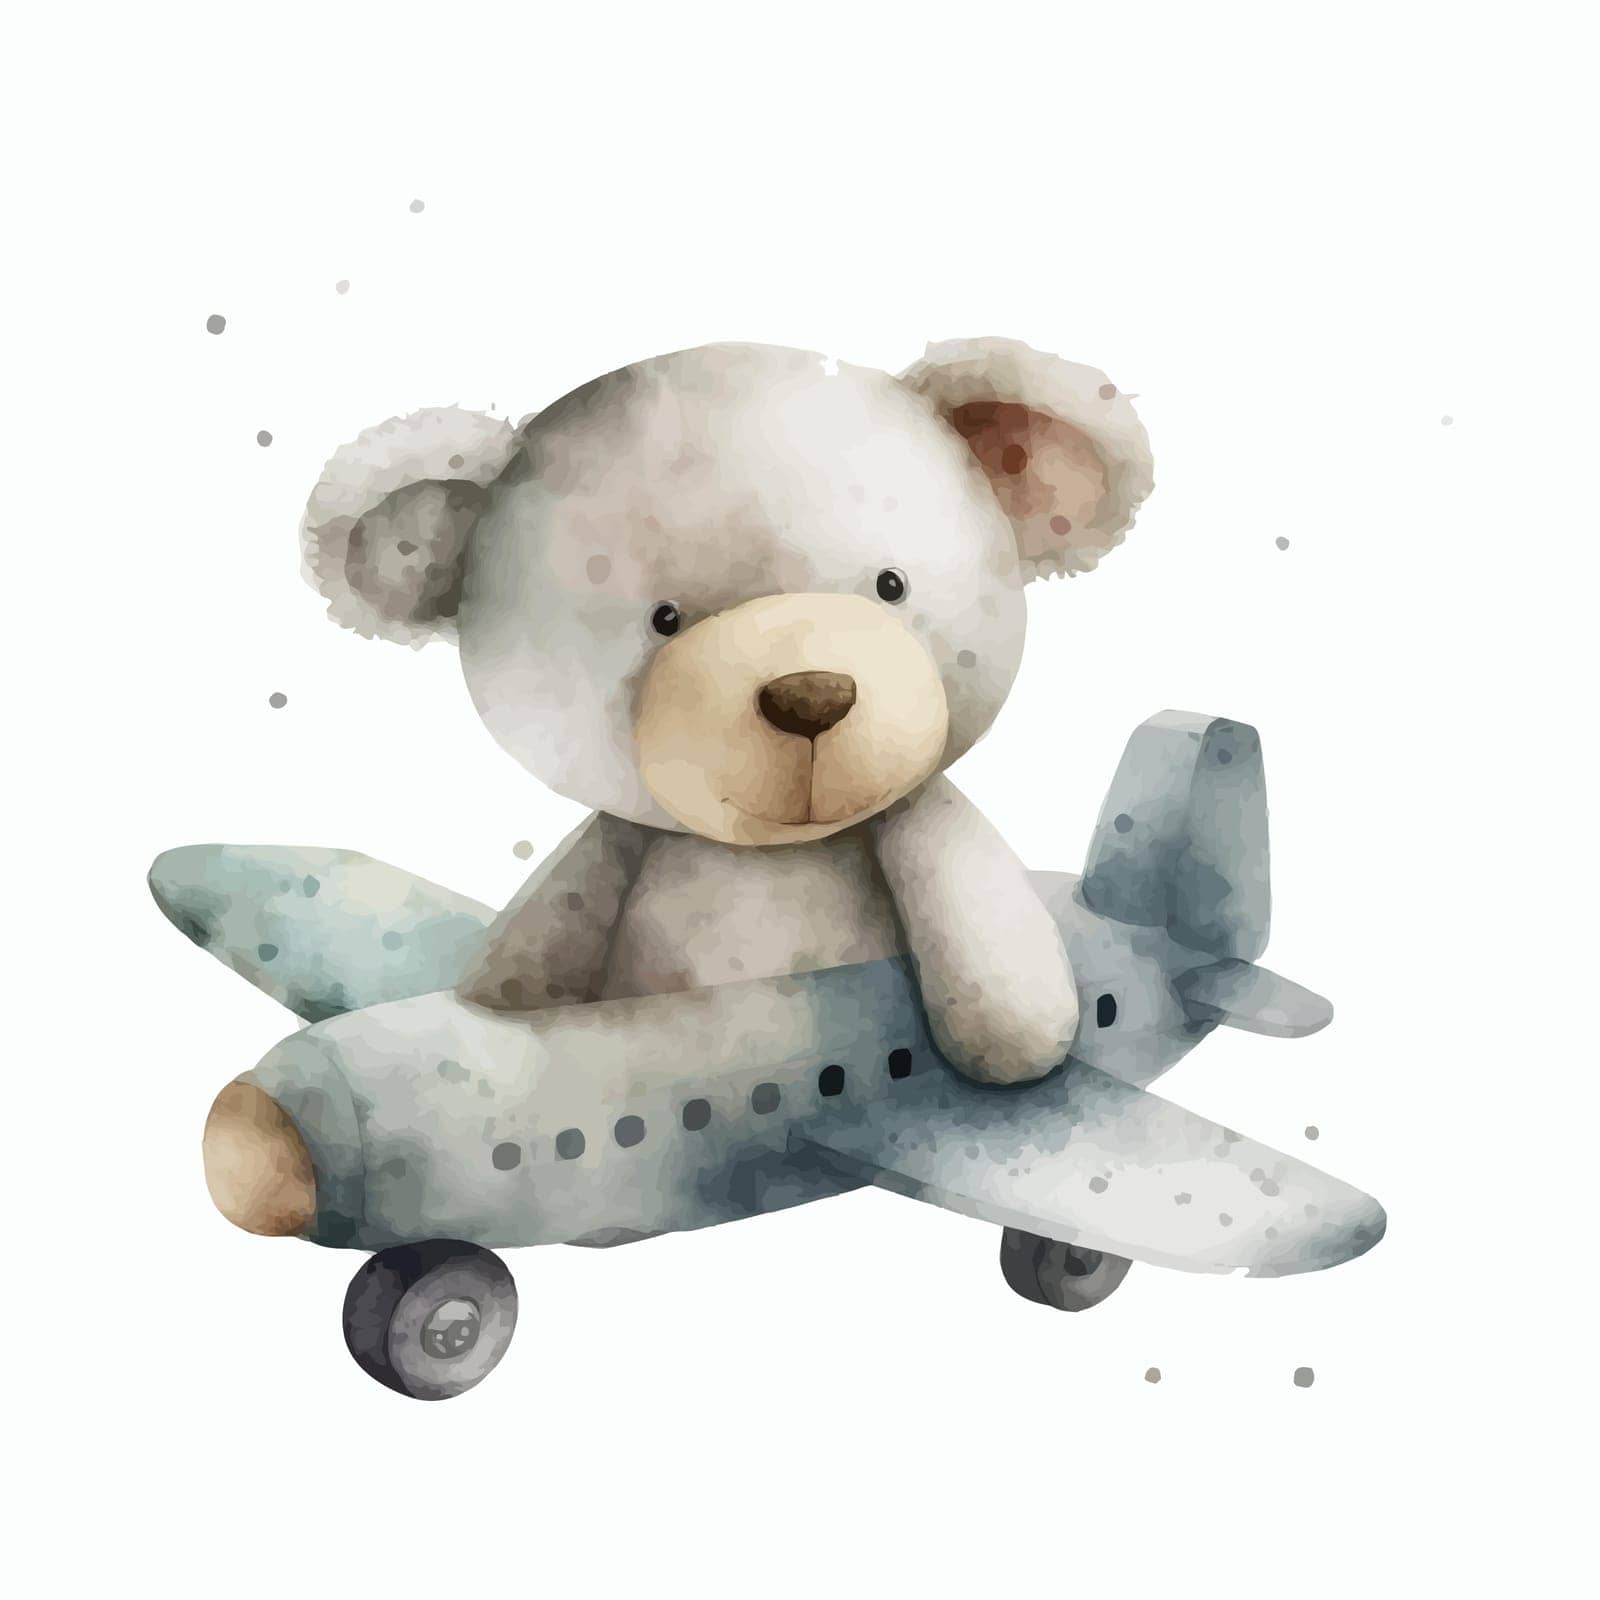 The bear is flying on a plane in 3d style. Isolated vector illustration by Andrei_01